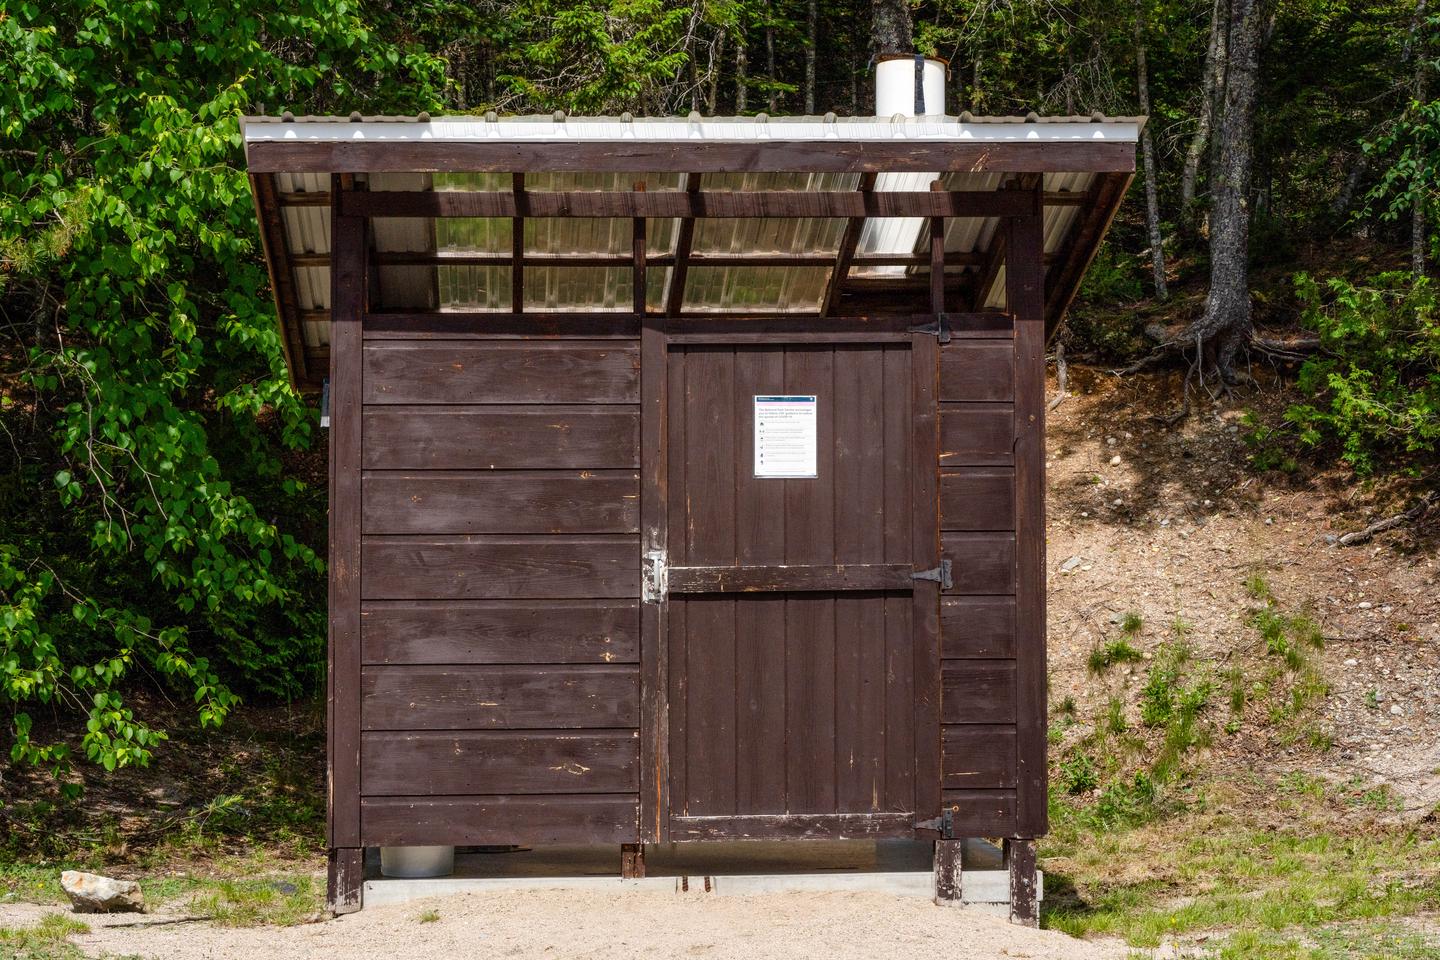 A brown wooden shack-like structure that shelters a pit toilet. The shelter has a leveled cement floor inside of it.A pit toilet is shared by all three campsites.